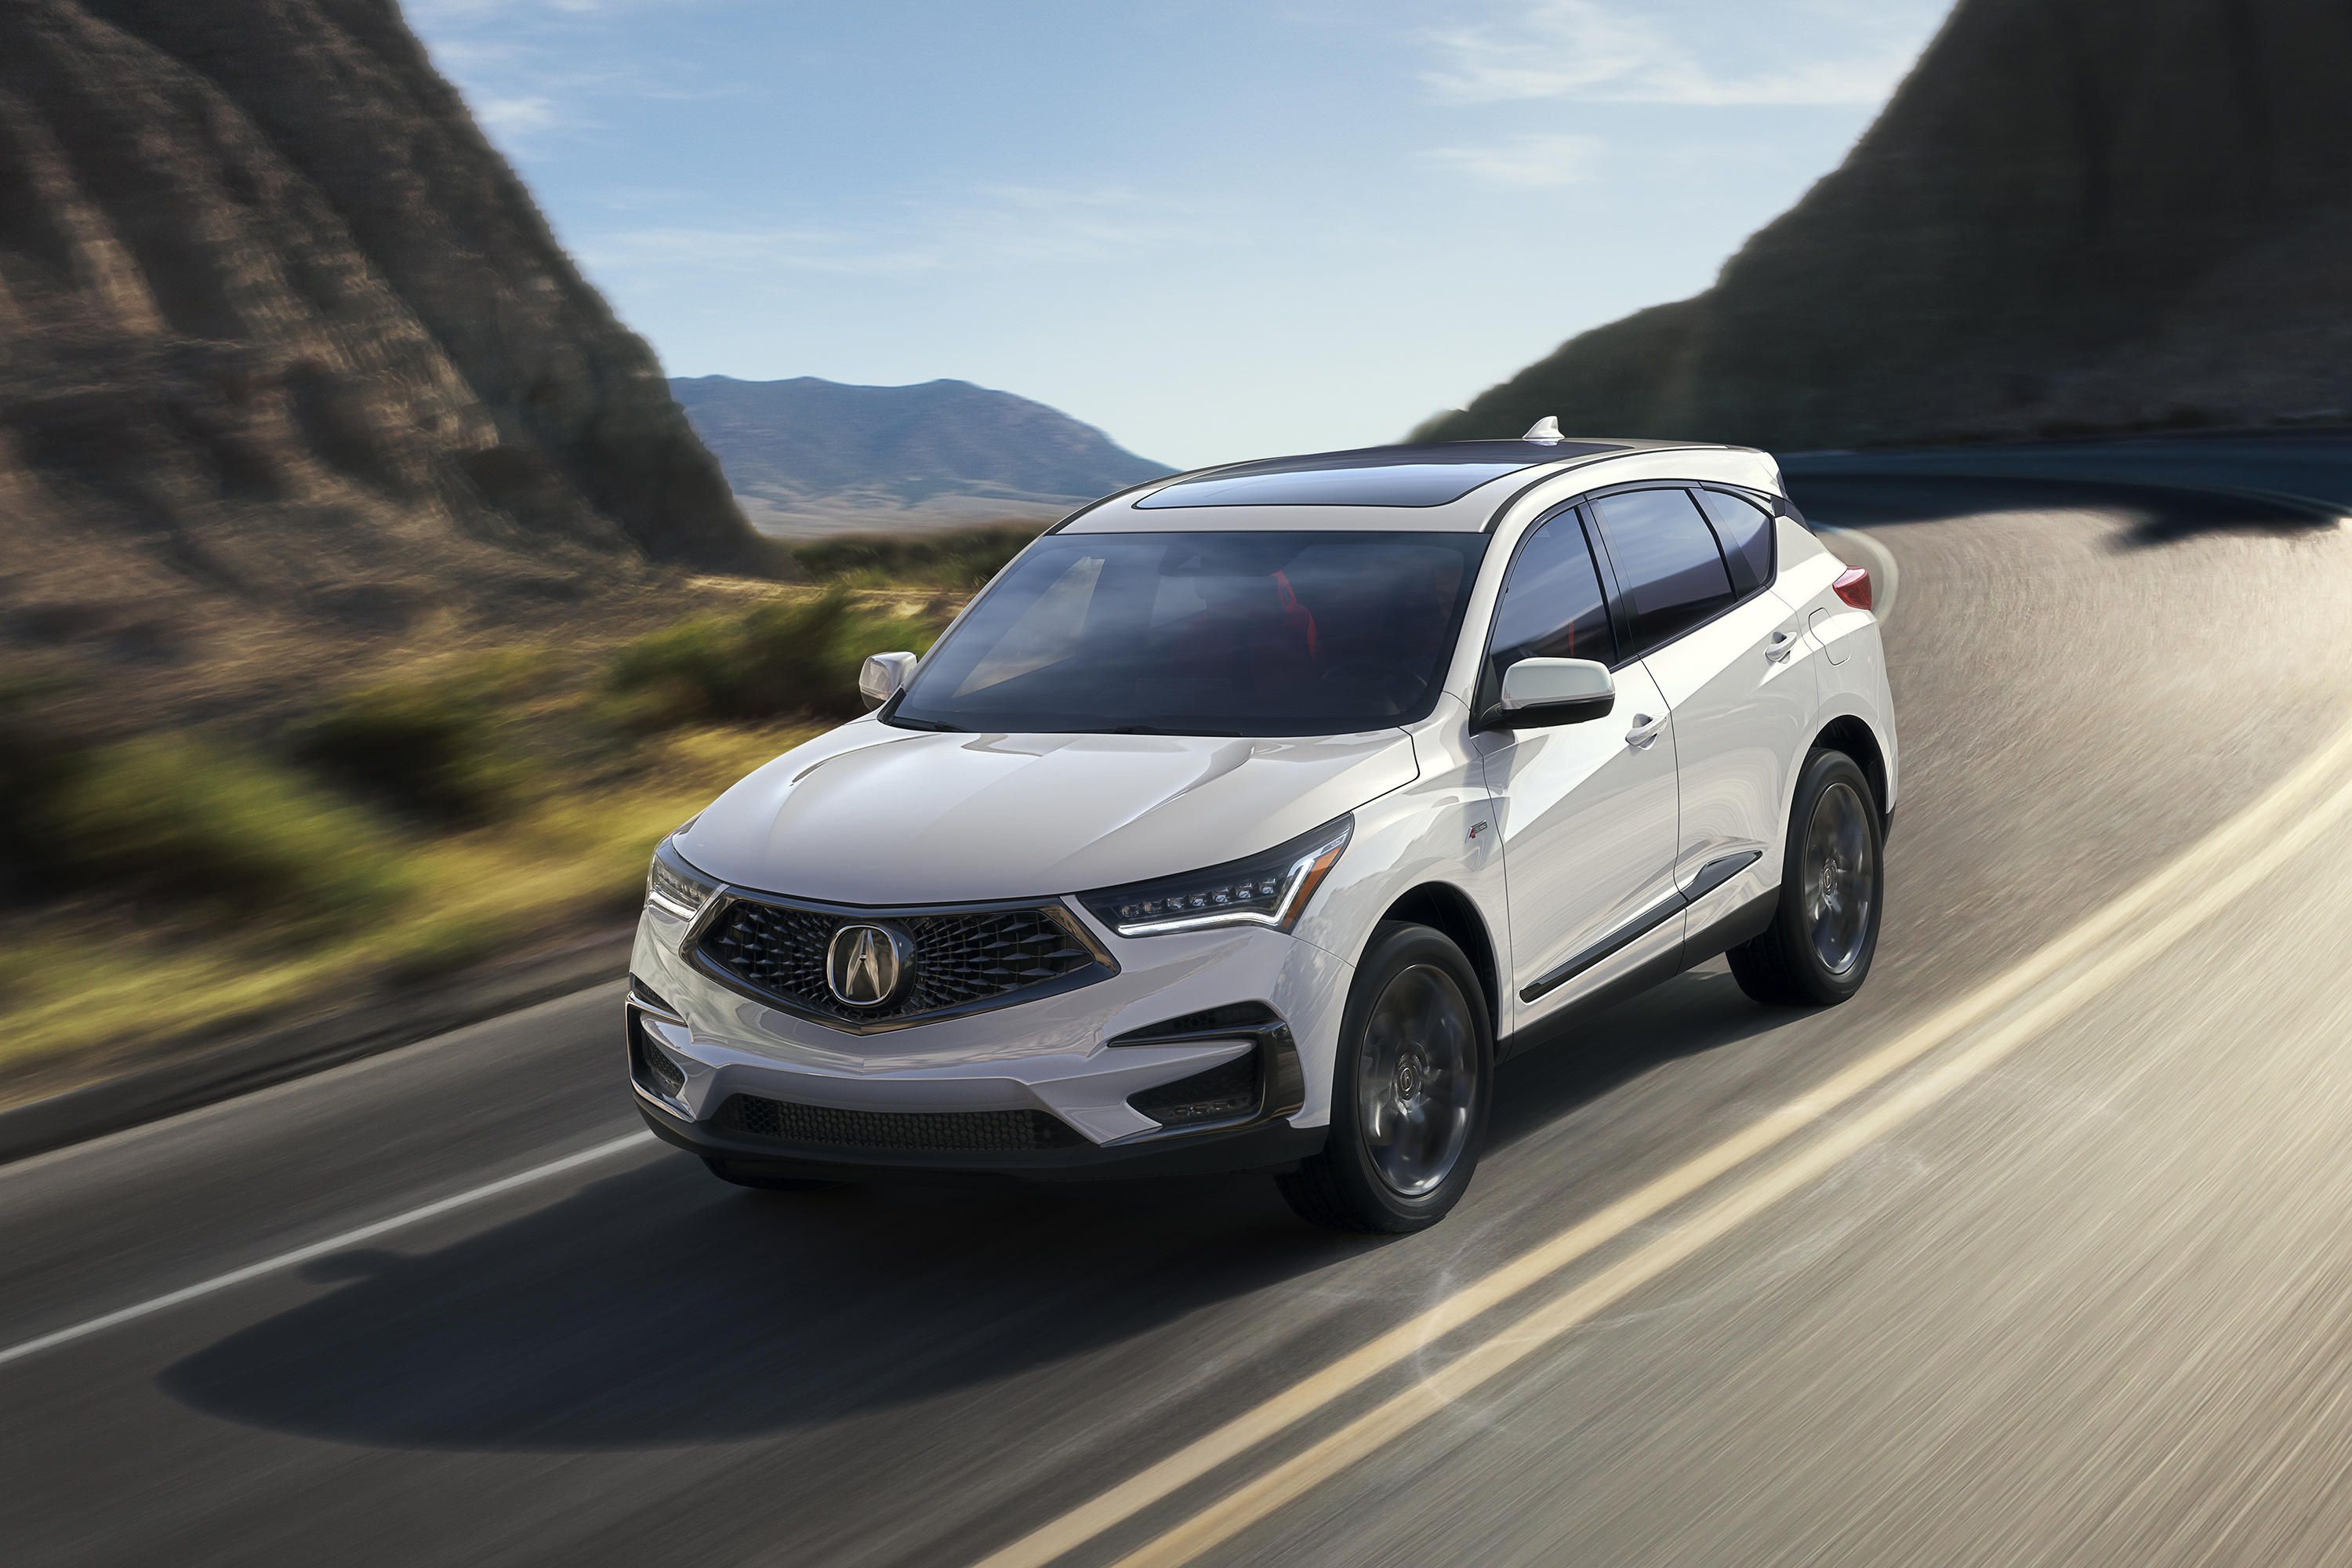 Acura RDX exterior restyling